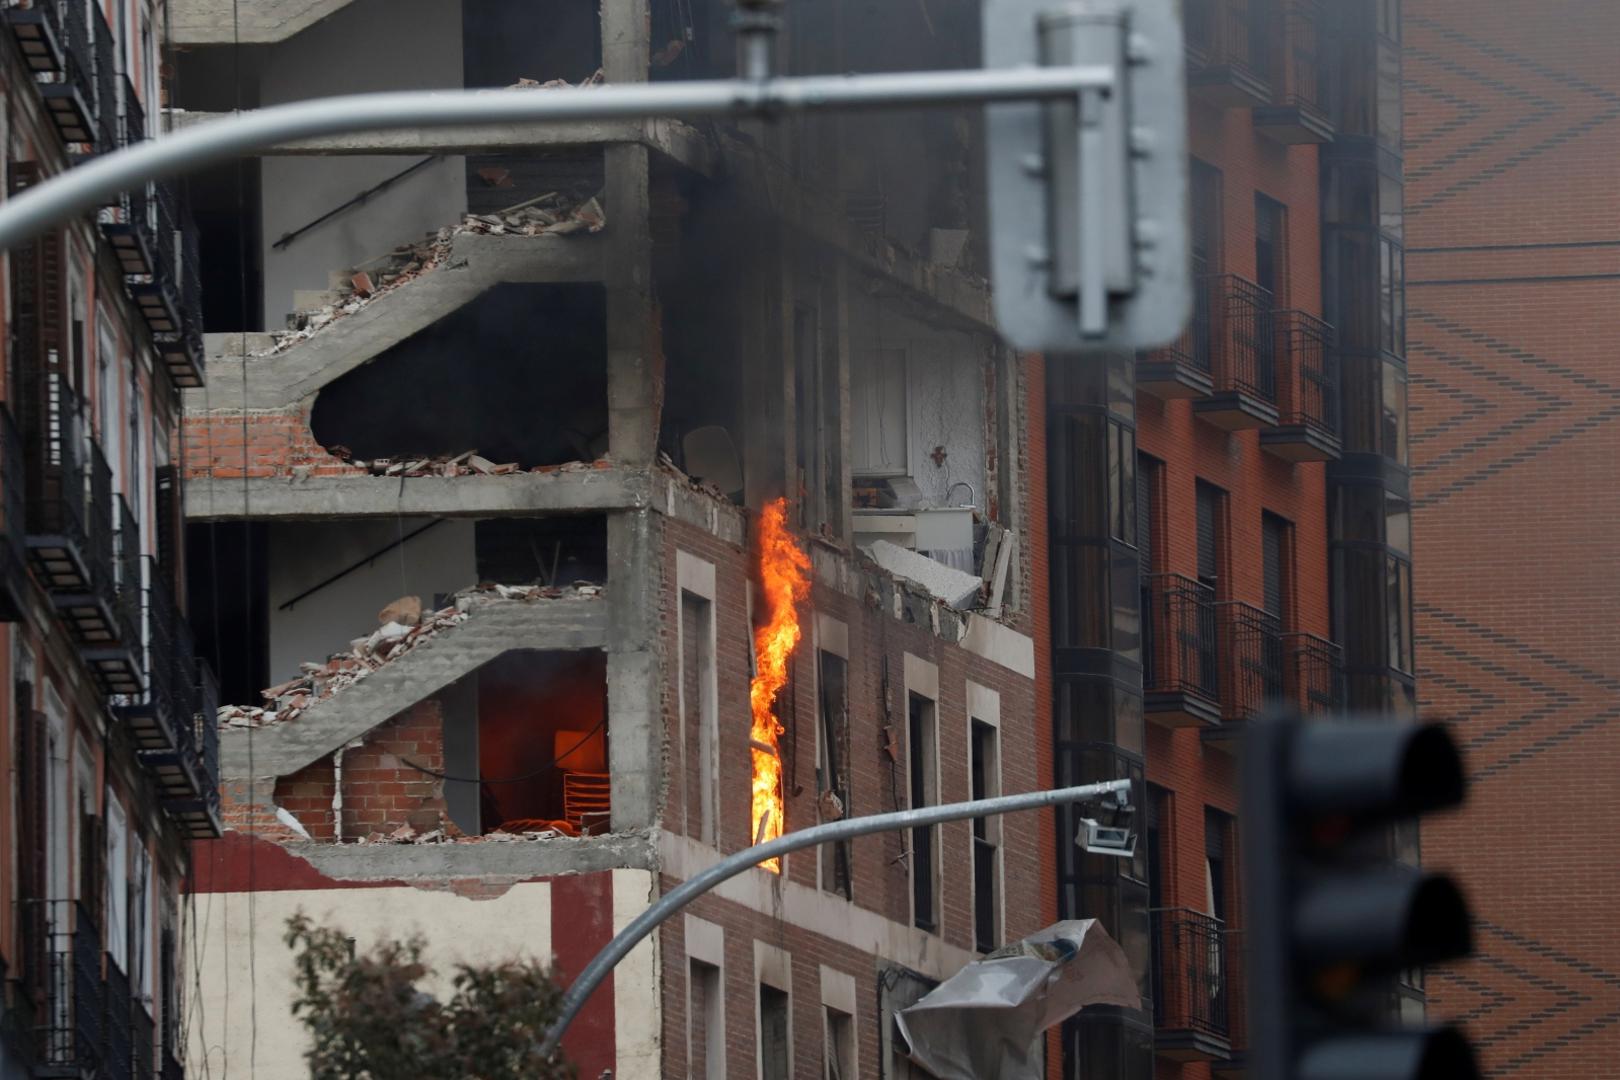 Explosion in Madrid downtown The building belonging to the Catholic Church burns after a deadly explosion, in Madrid downtown, Spain January 20, 2021. REUTERS/Susana Vera SUSANA VERA